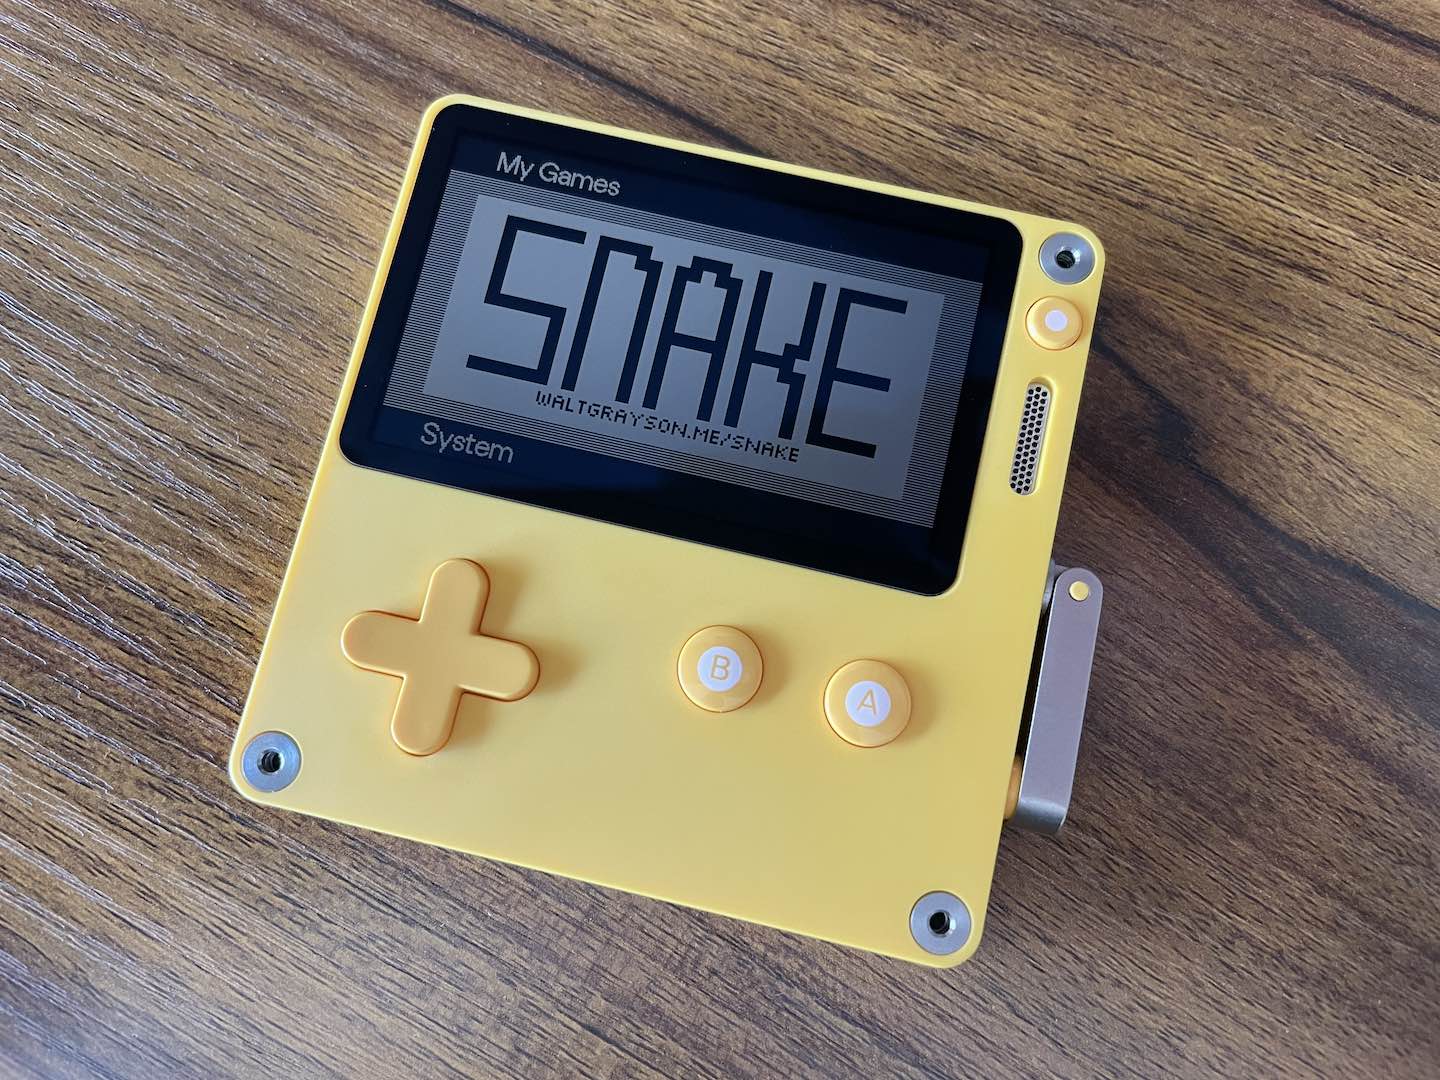 Playdate with snake game installed